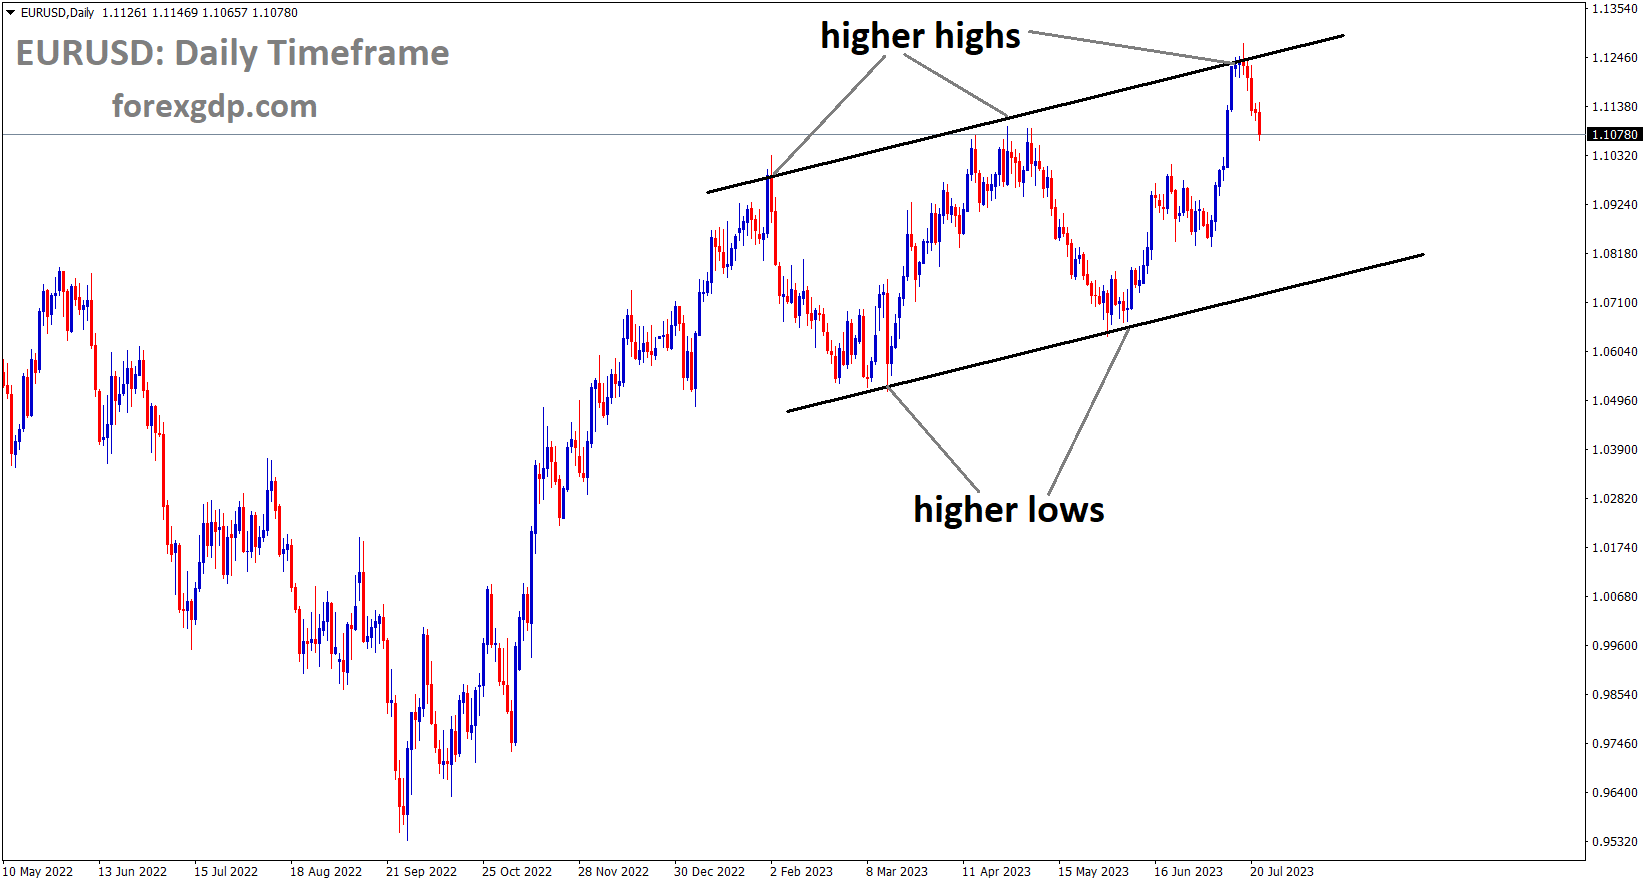 EURUSD is moving in an Ascending channel and the market has fallen from the higher high area of the channel 1